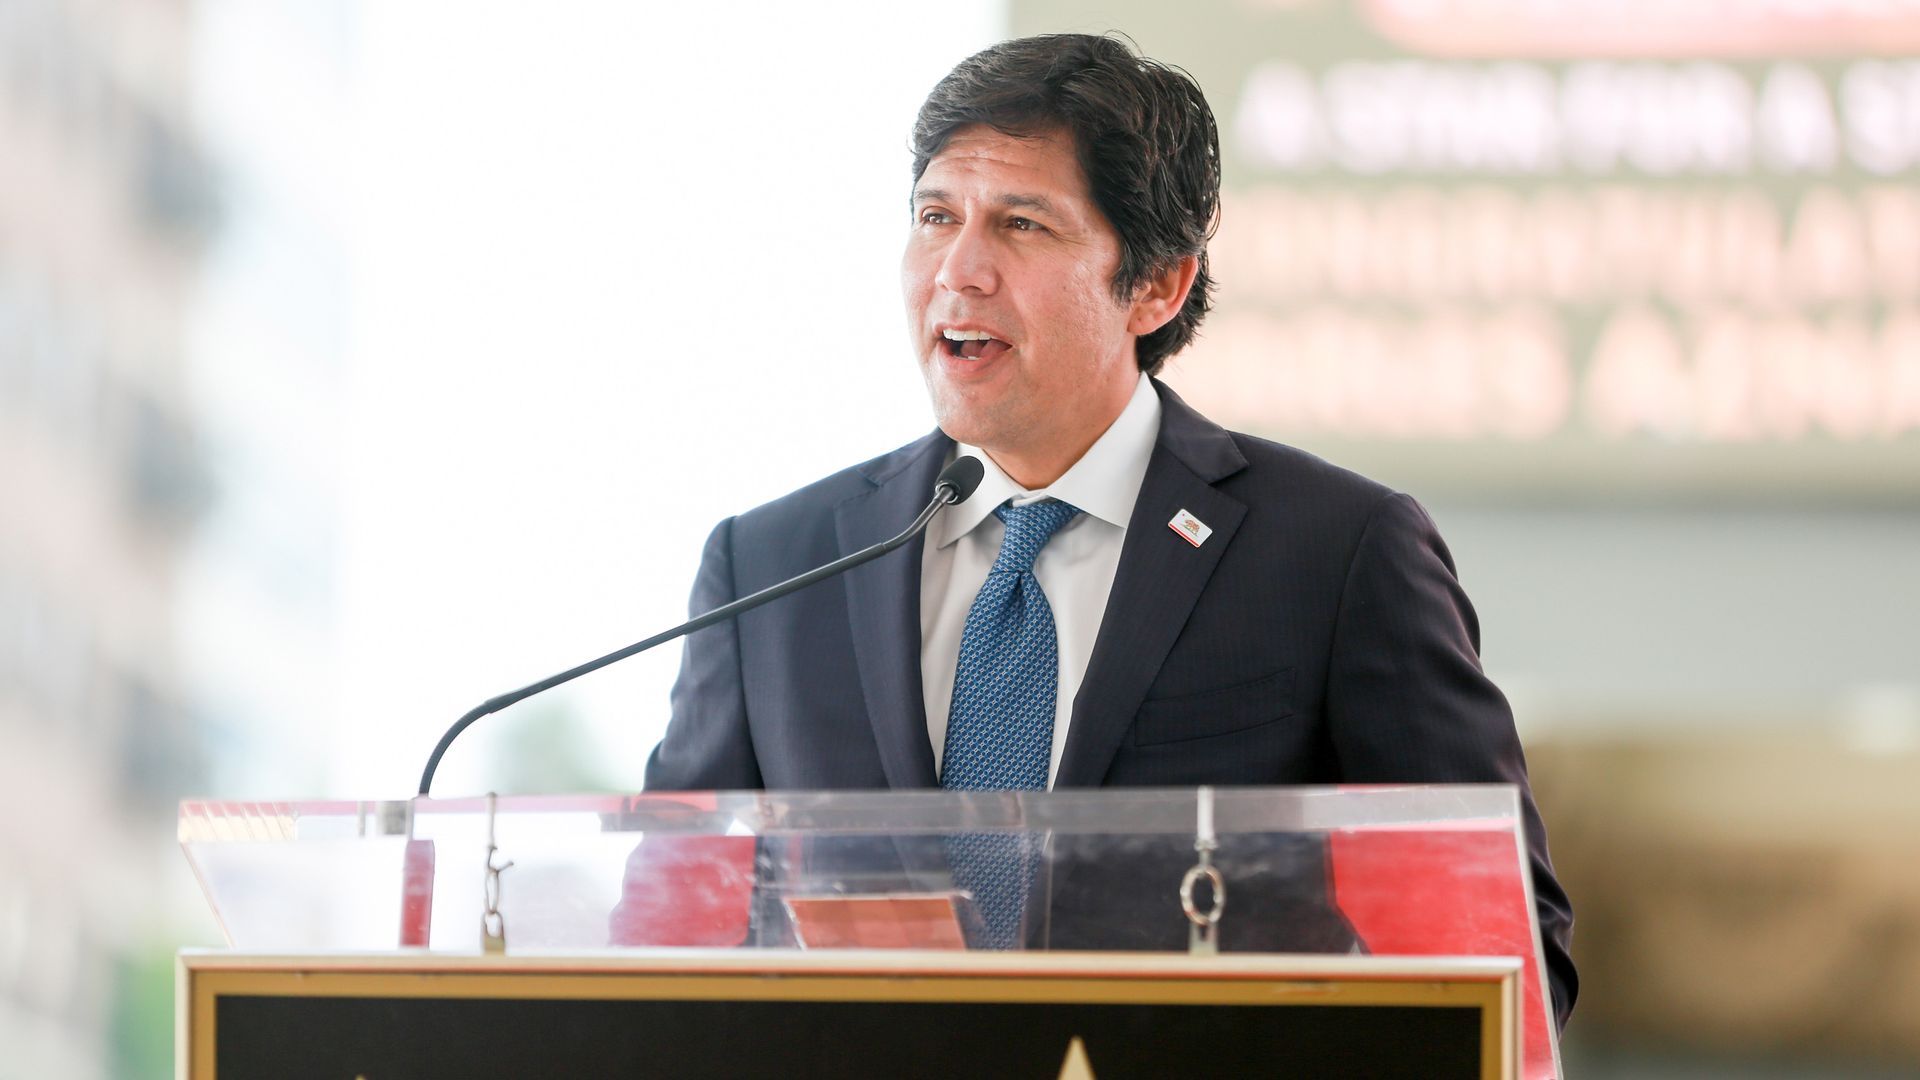 Kevin de León wearing a suit and speaking from a podium